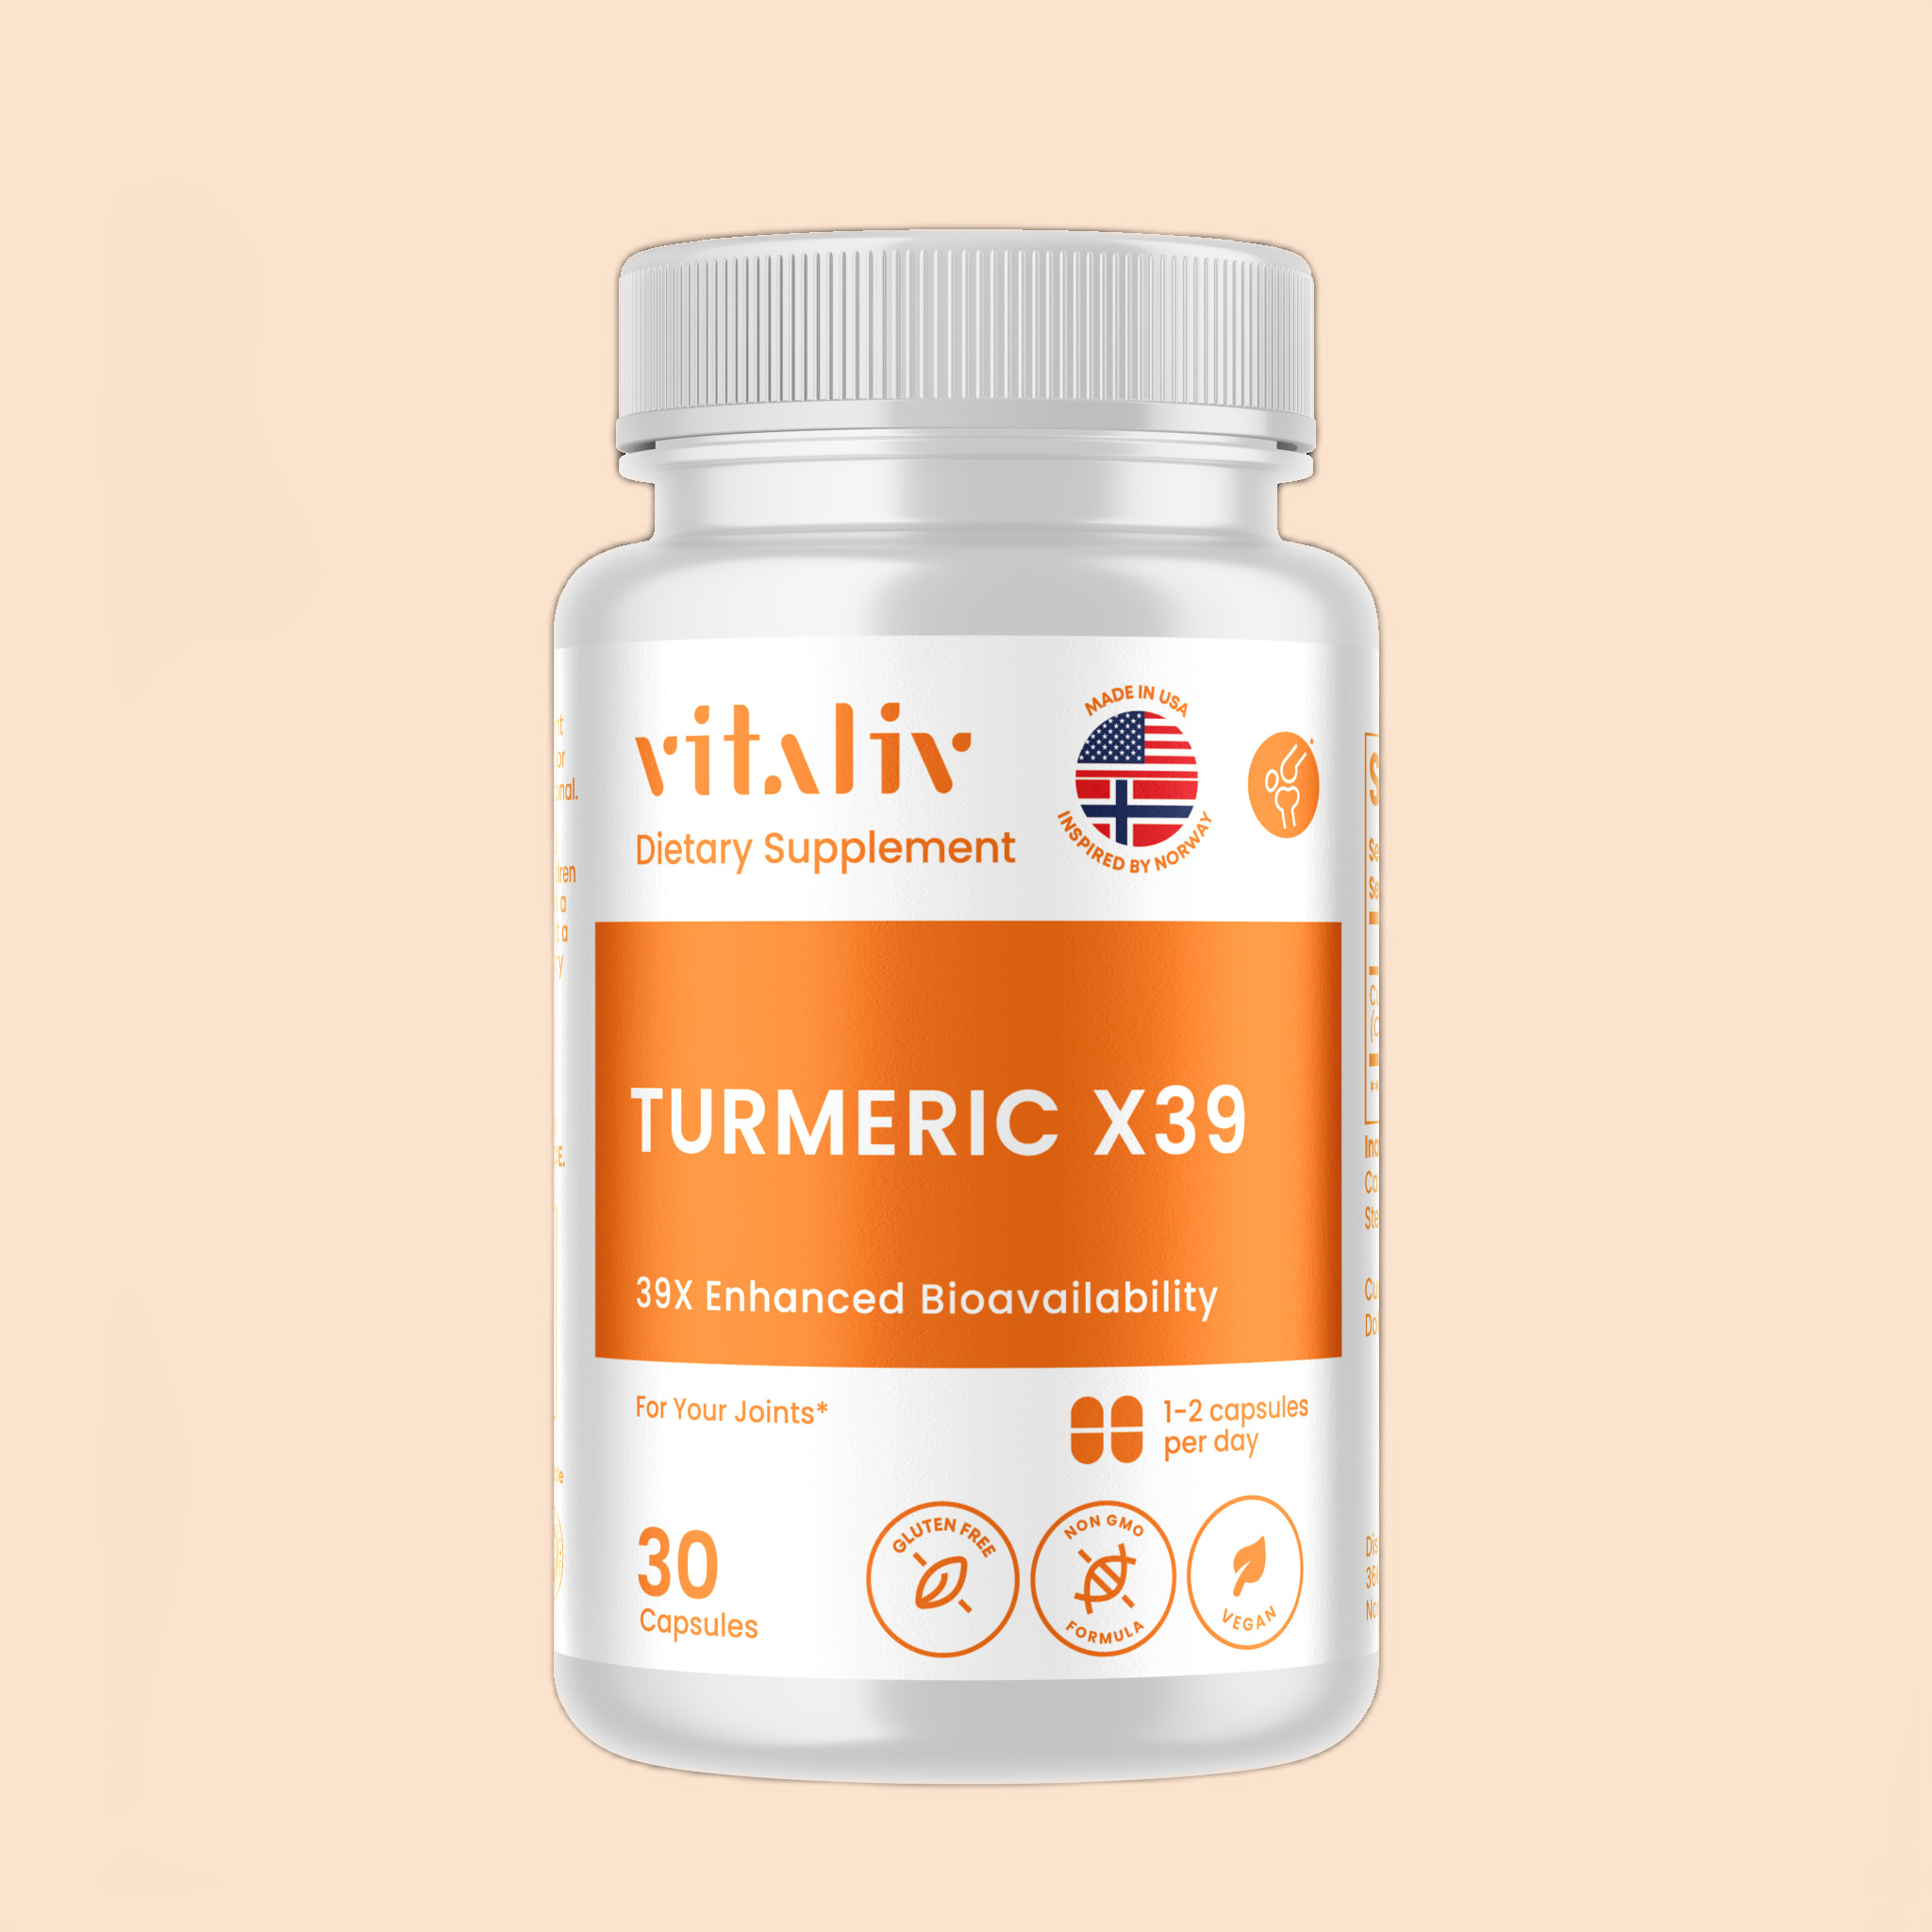 Tumeric X39 By Vitaliv Review By Wellify Times